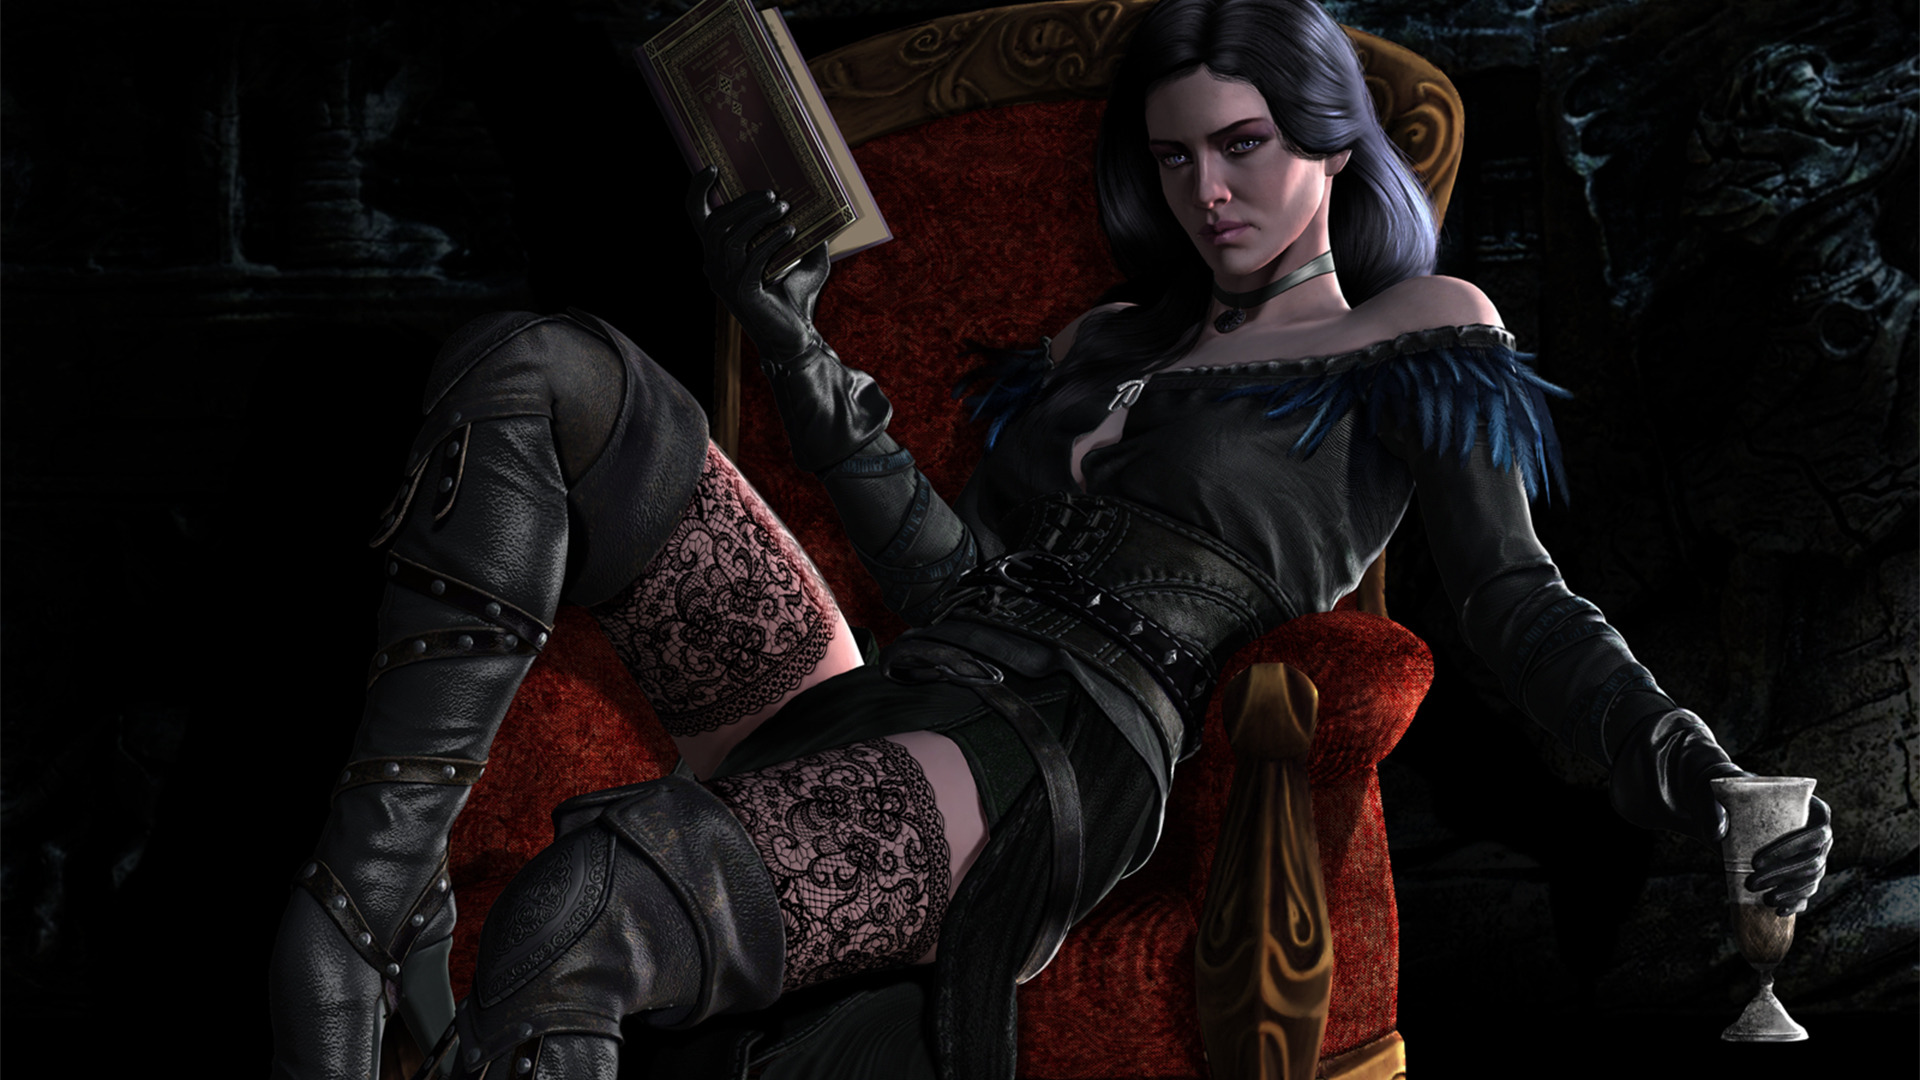 Yennefer of vengerberg the witcher 3 voiced standalone follower se фото 23